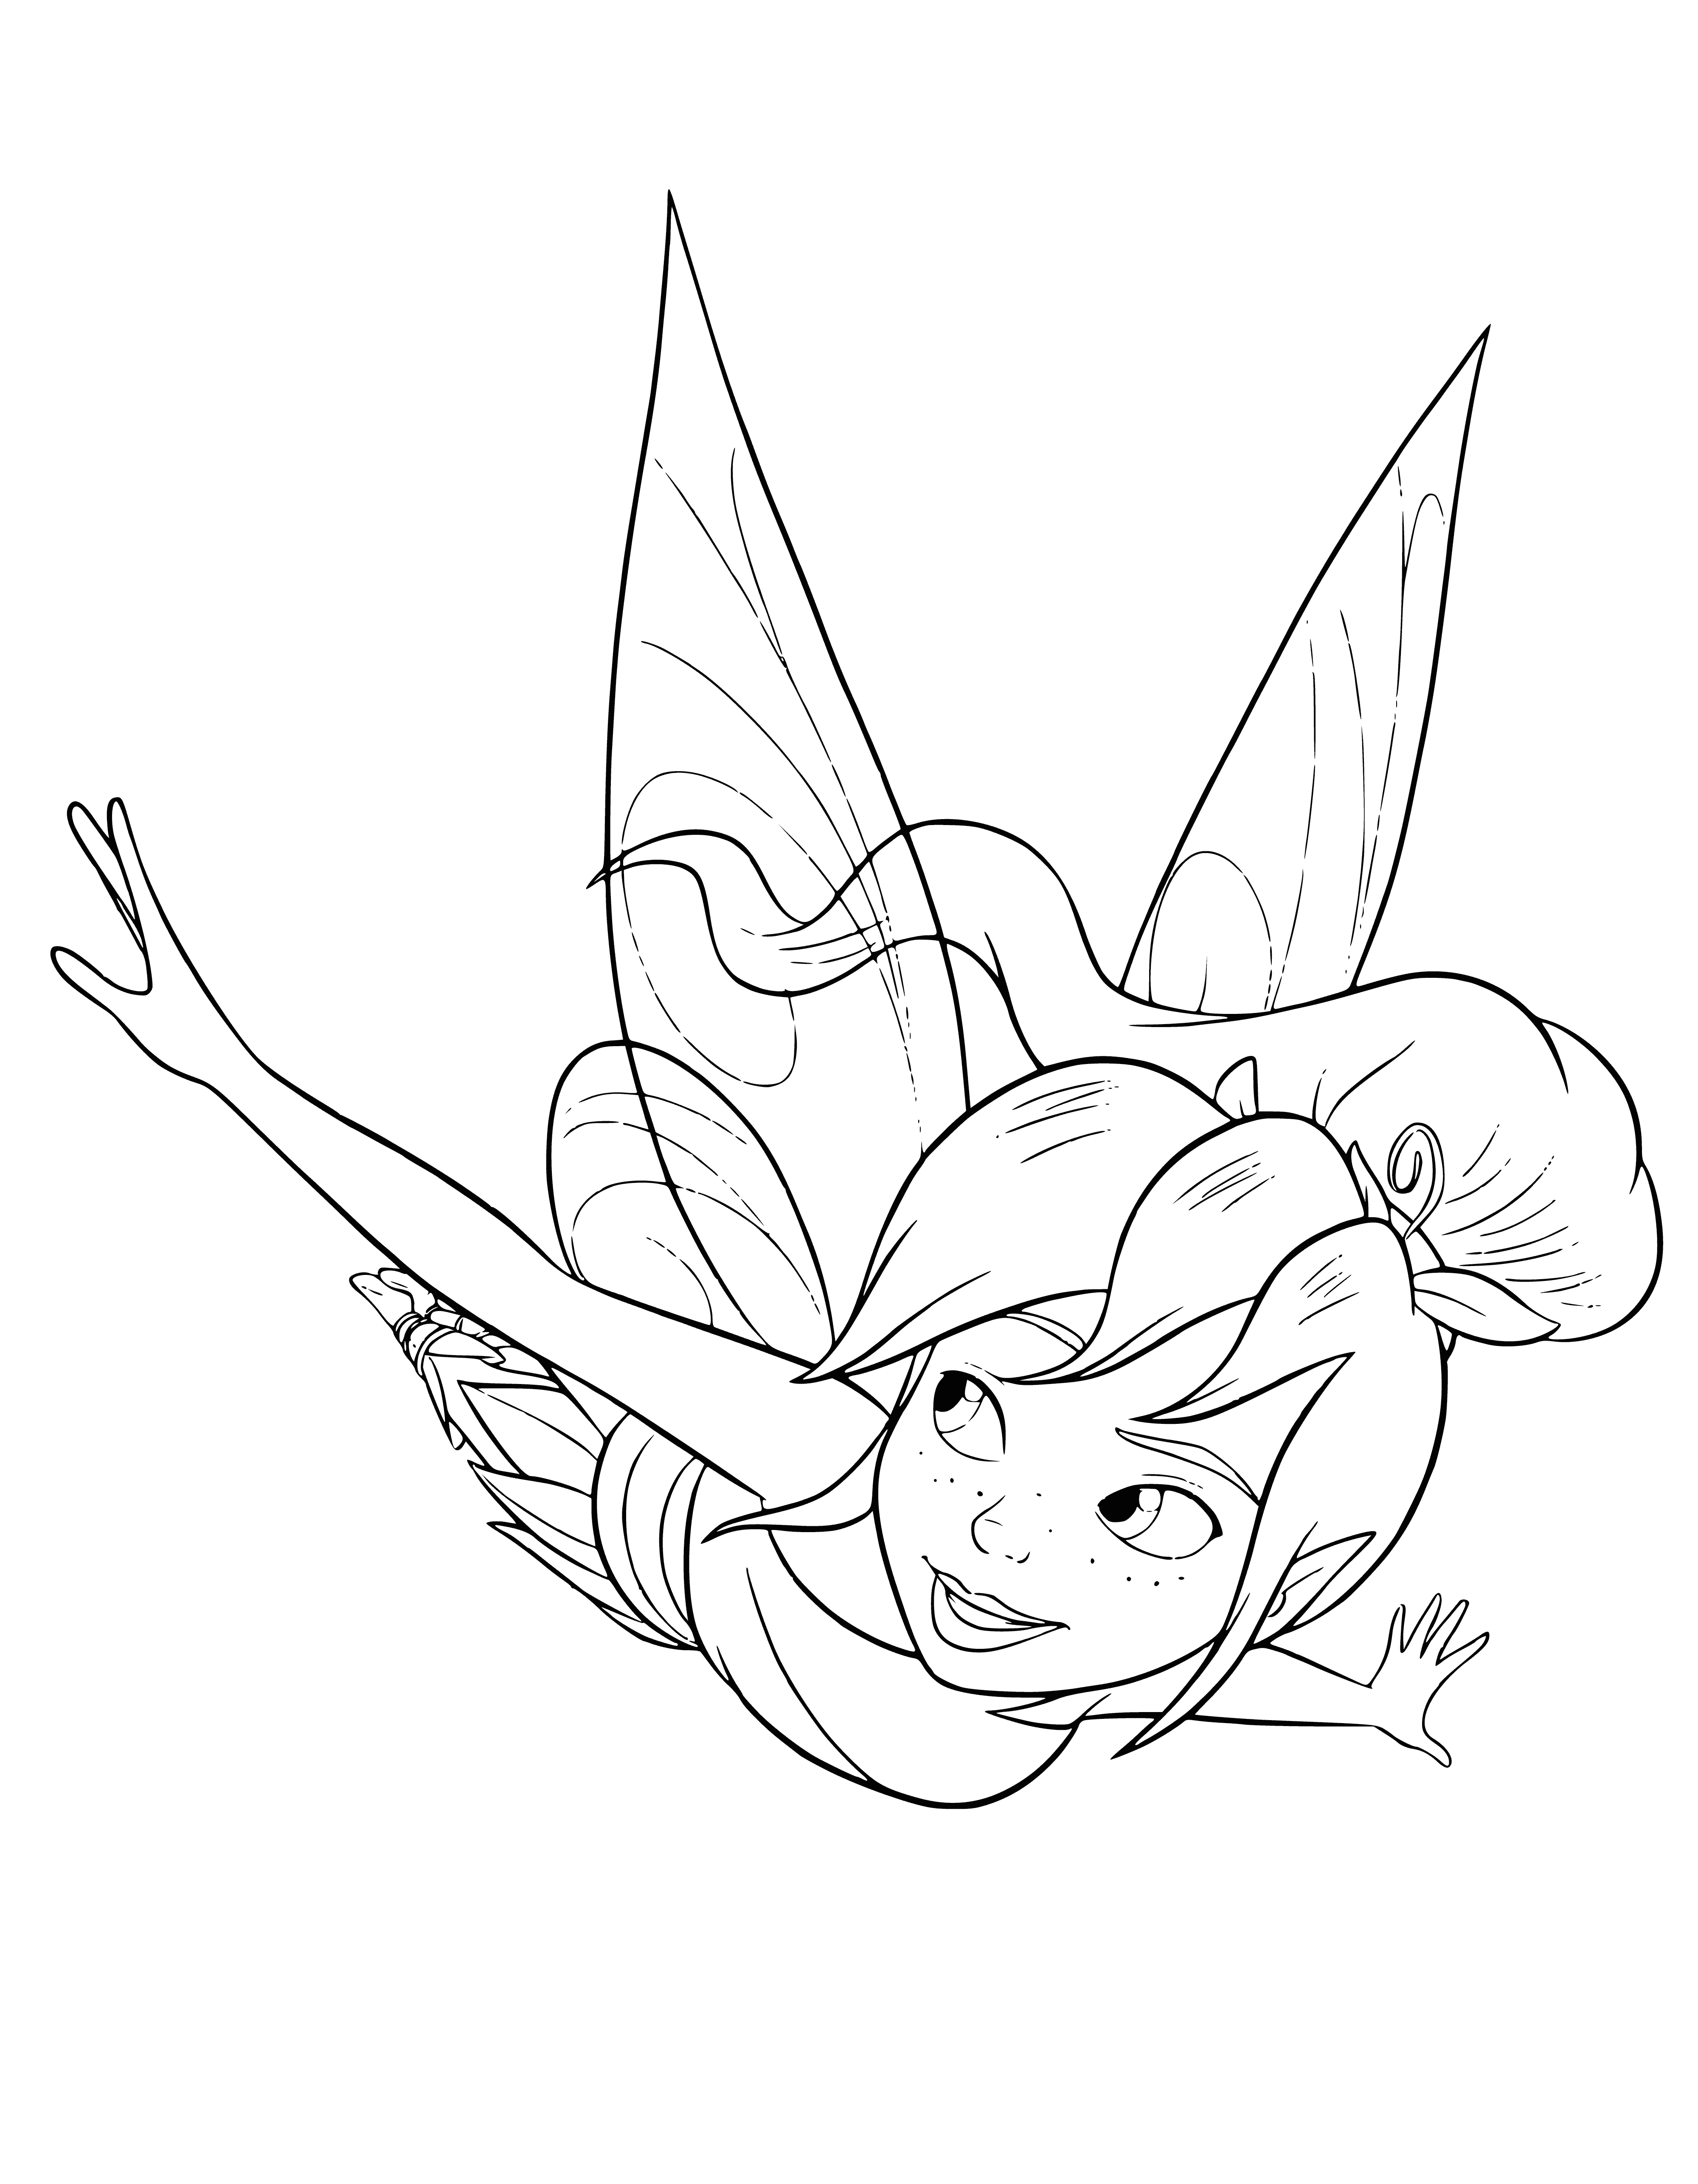 Fairy fauna in flight coloring page